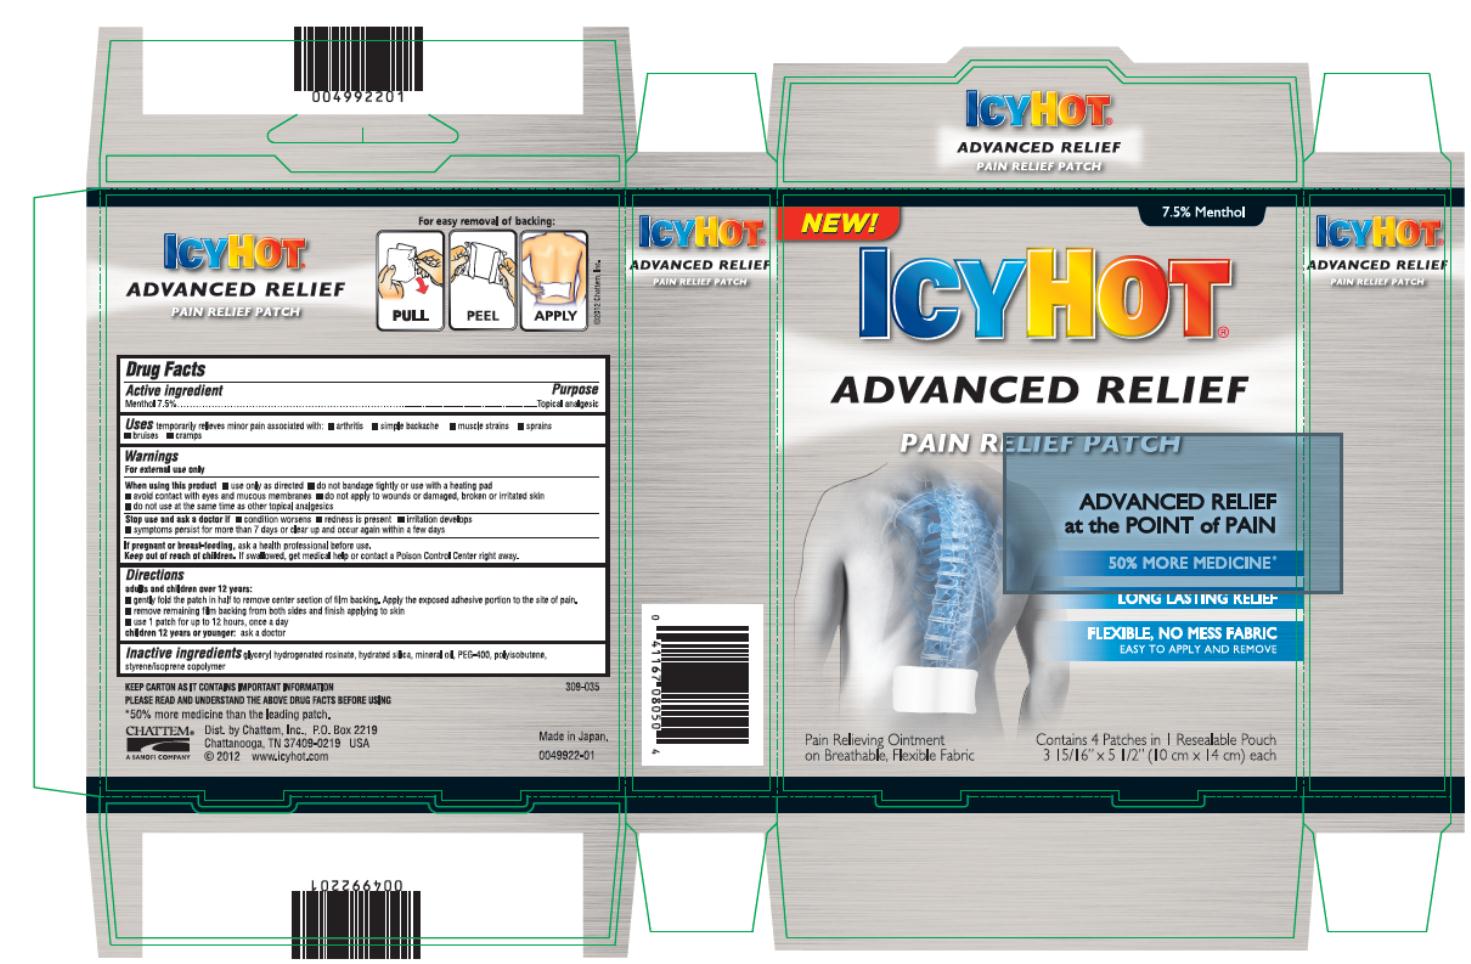 Principal Display Panel 
ICY HOT®
ADVANCED RELIEF
PAIN RELIEF PATCH
ADVANCED RELIEF at the POINT of PAIN
50% MORE MEDICINE
LONG LASTING RELIEF
FLEXIBLE, NO MESS FABRIC
Easy to Apply and Remove
Contains 4 Patches in 1 Resalable Pouch
3 15/16” x 5 ½” (10 cm x 14 cm) each
